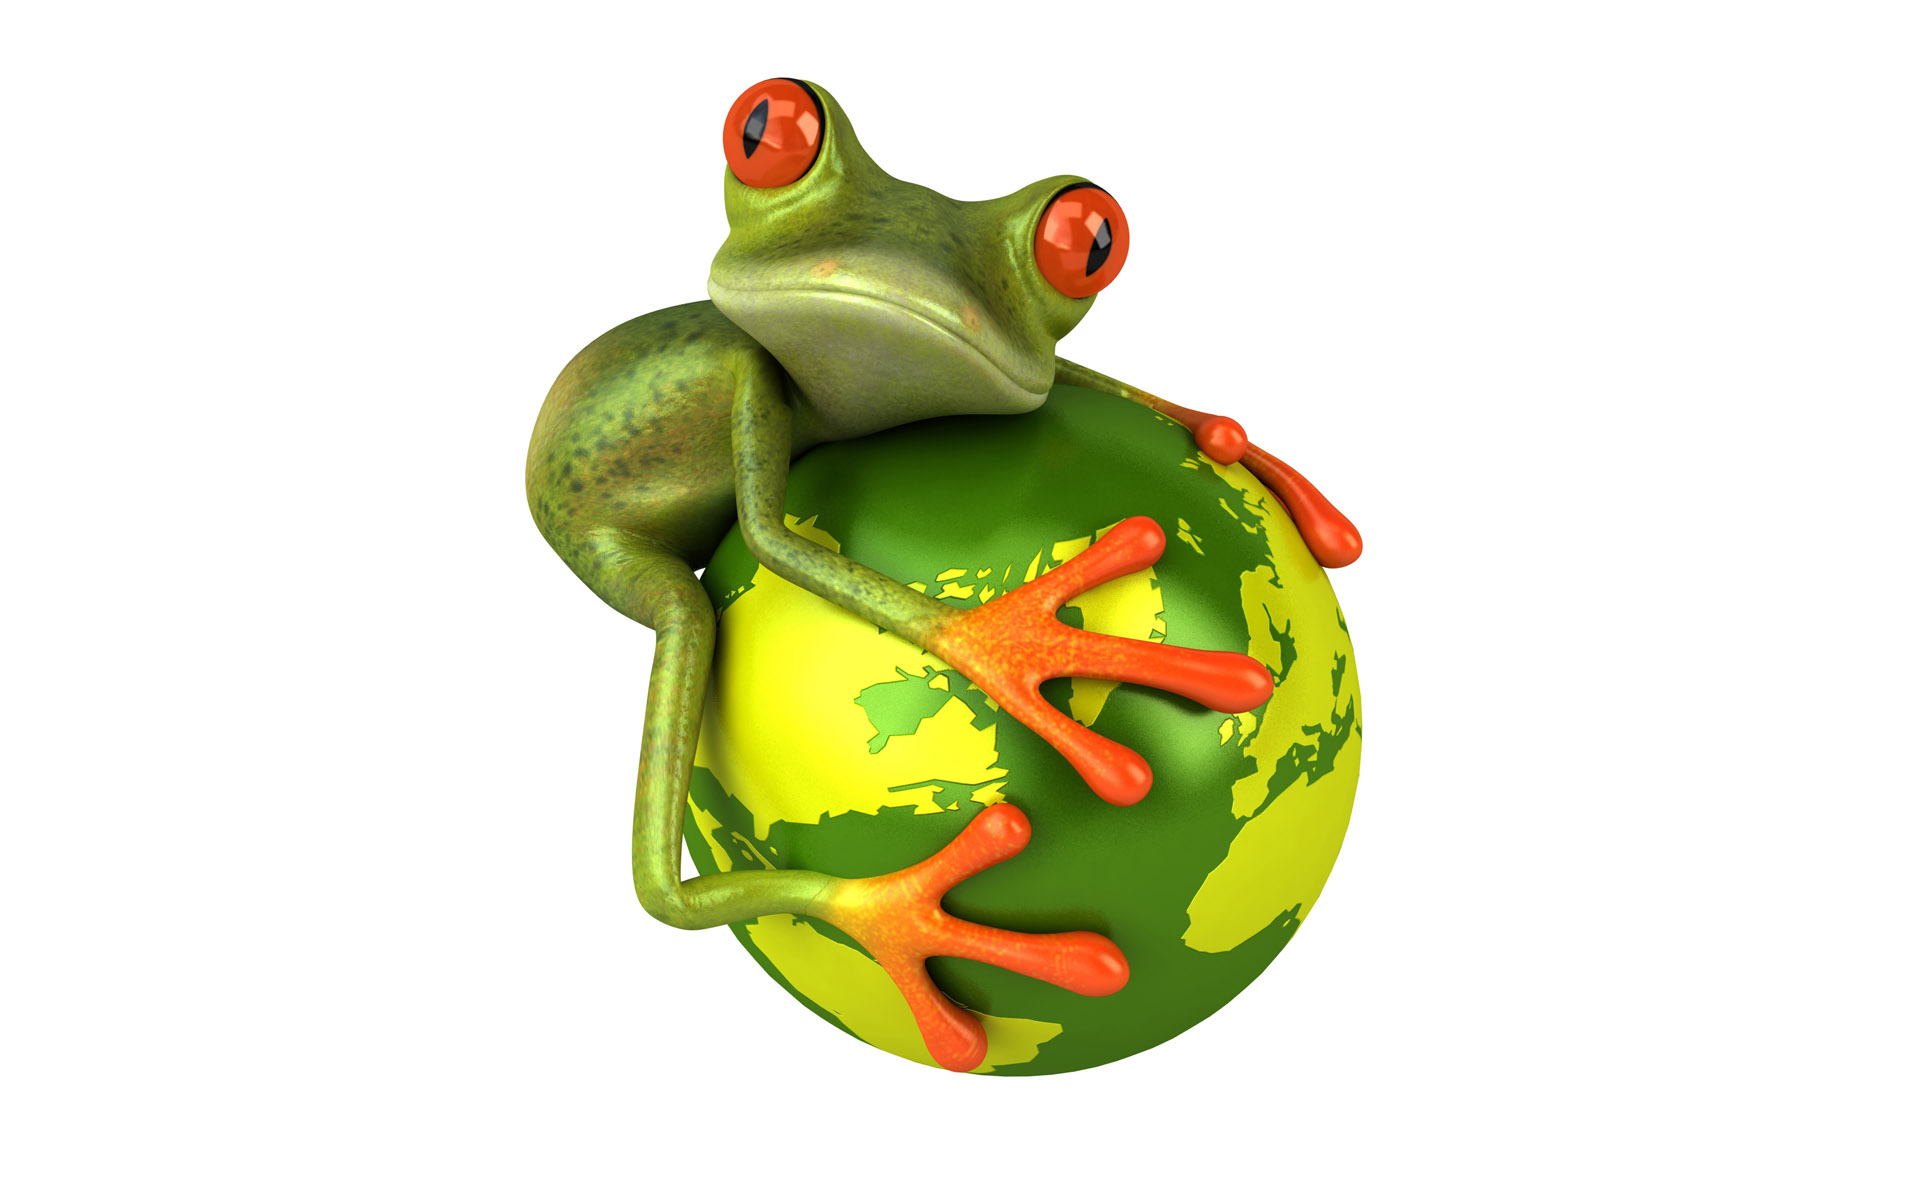 frog 3d wallpaper for desktop is a great wallpaper for your computer